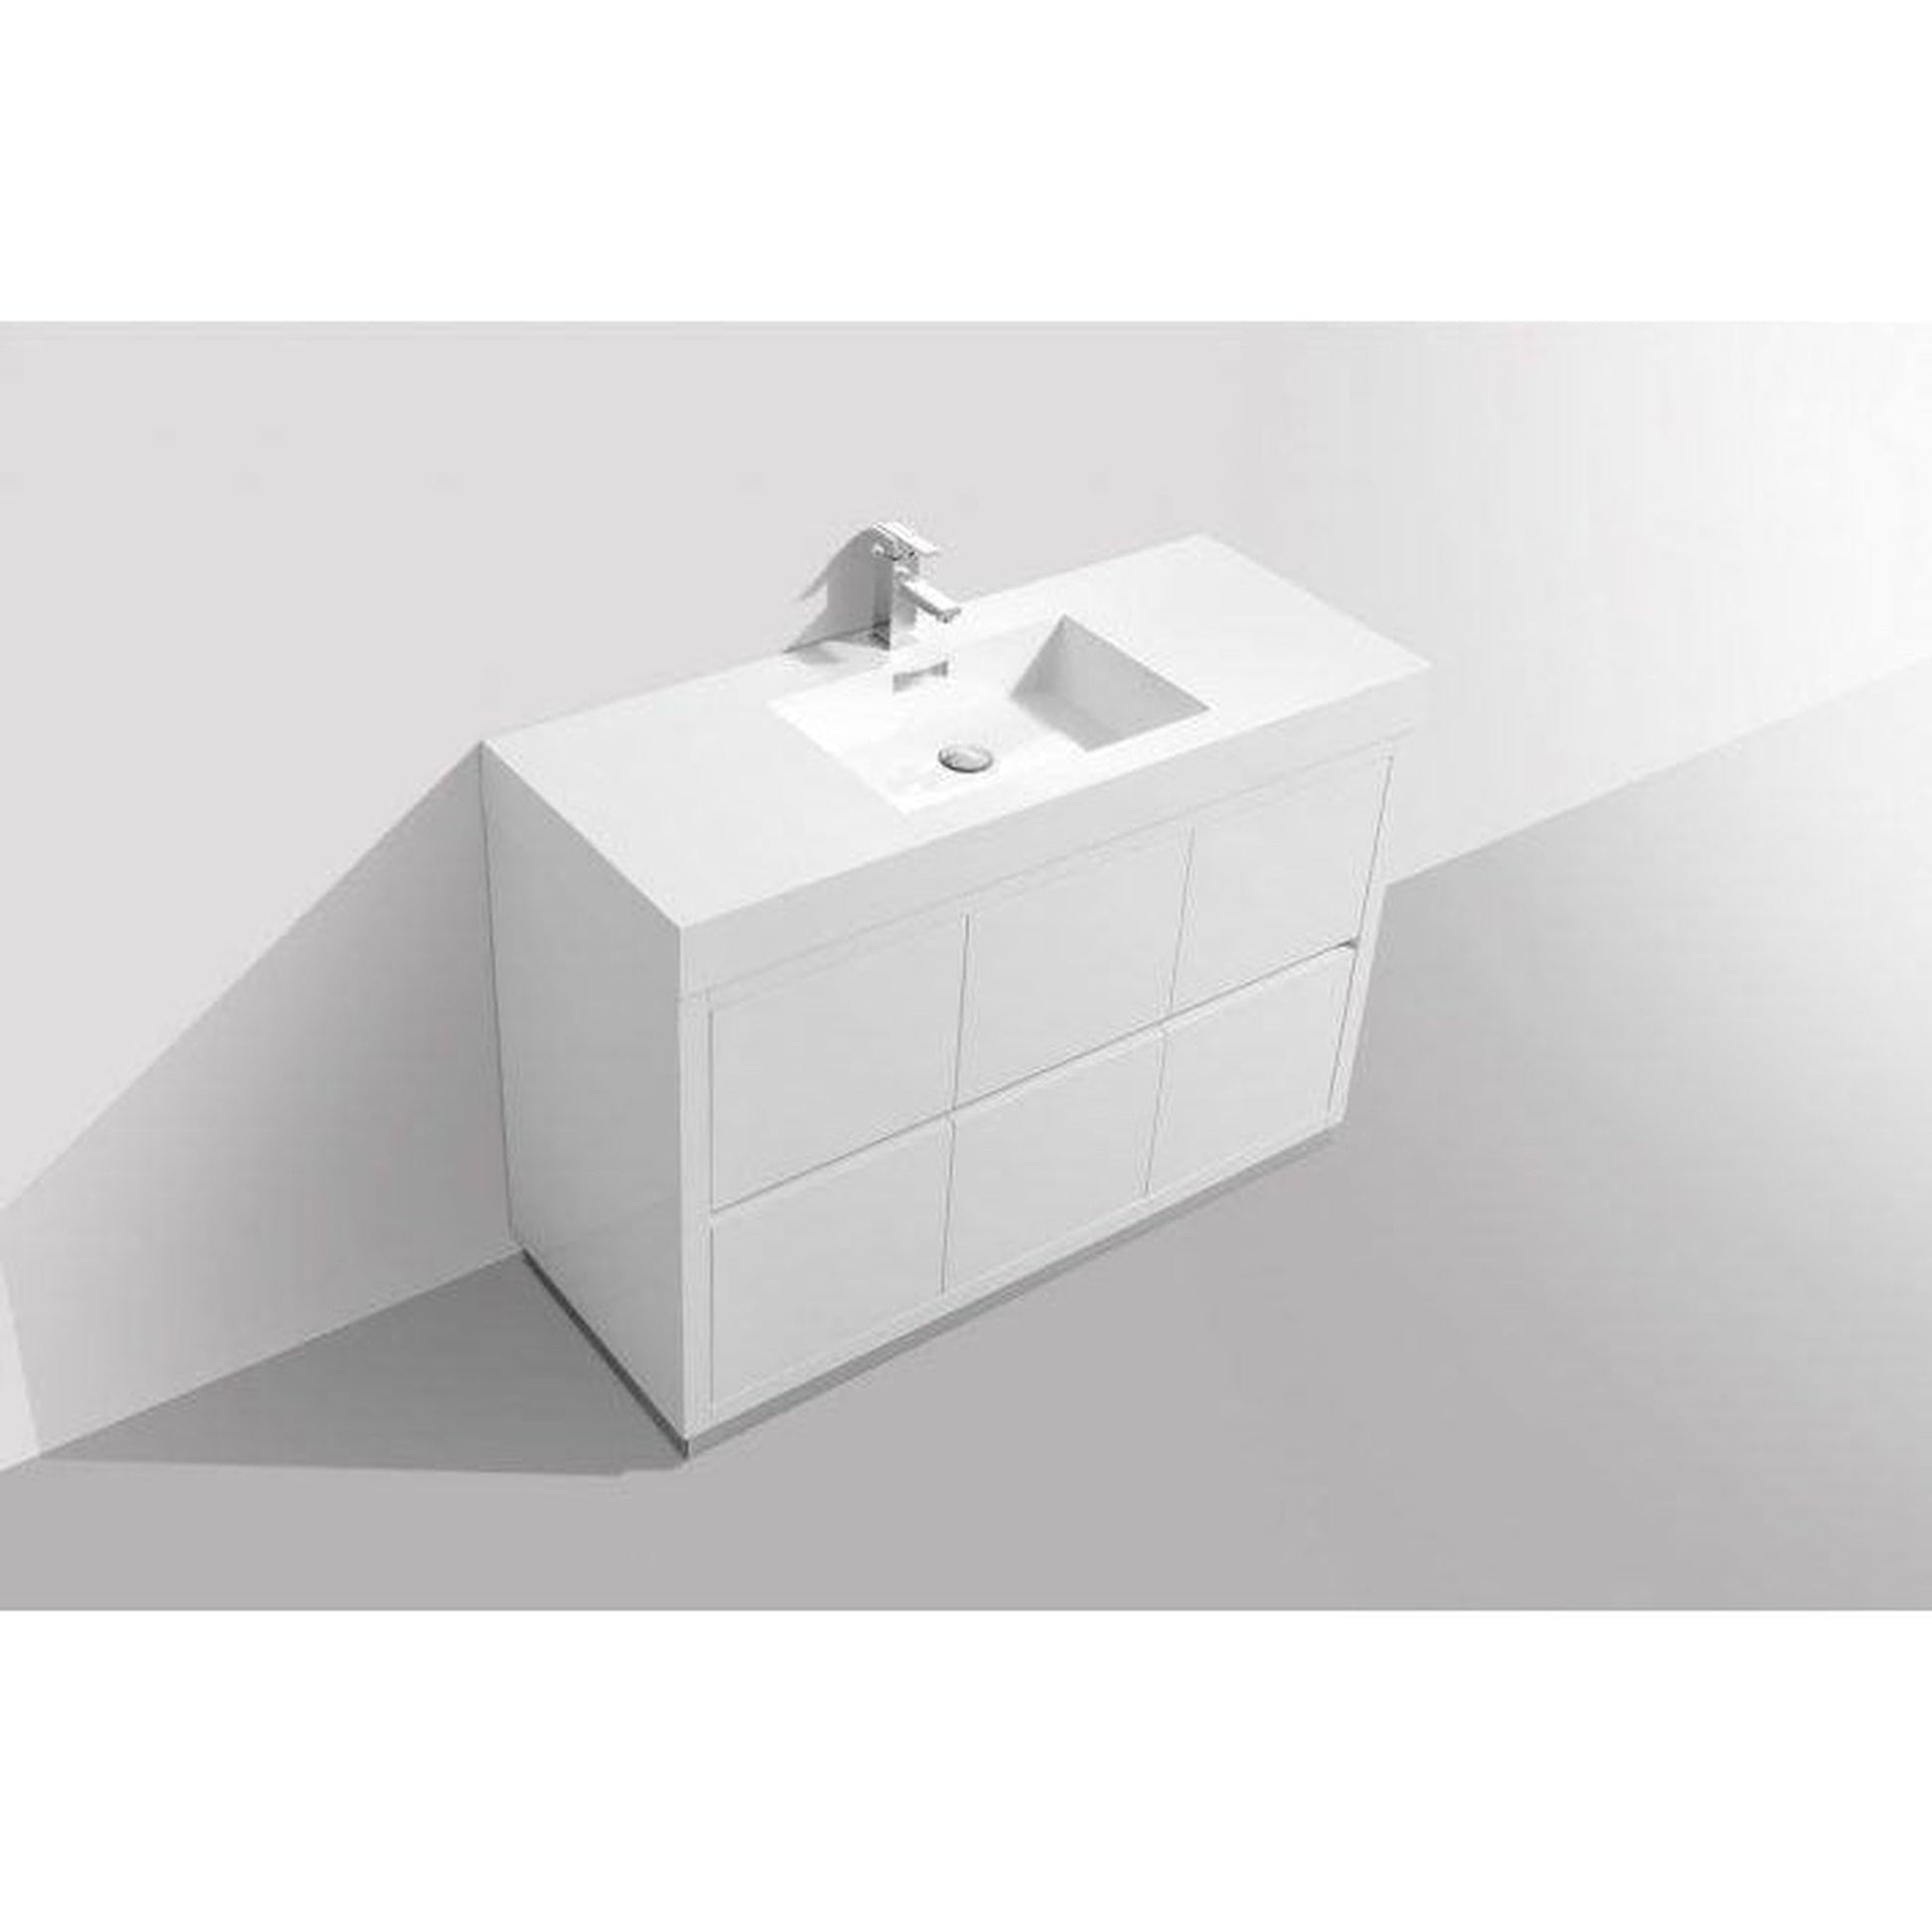 KubeBath Bliss 48" High Gloss White Freestanding Modern Bathroom Vanity With Single Integrated Acrylic Sink With Overflow and 48" White Framed Mirror With Shelf